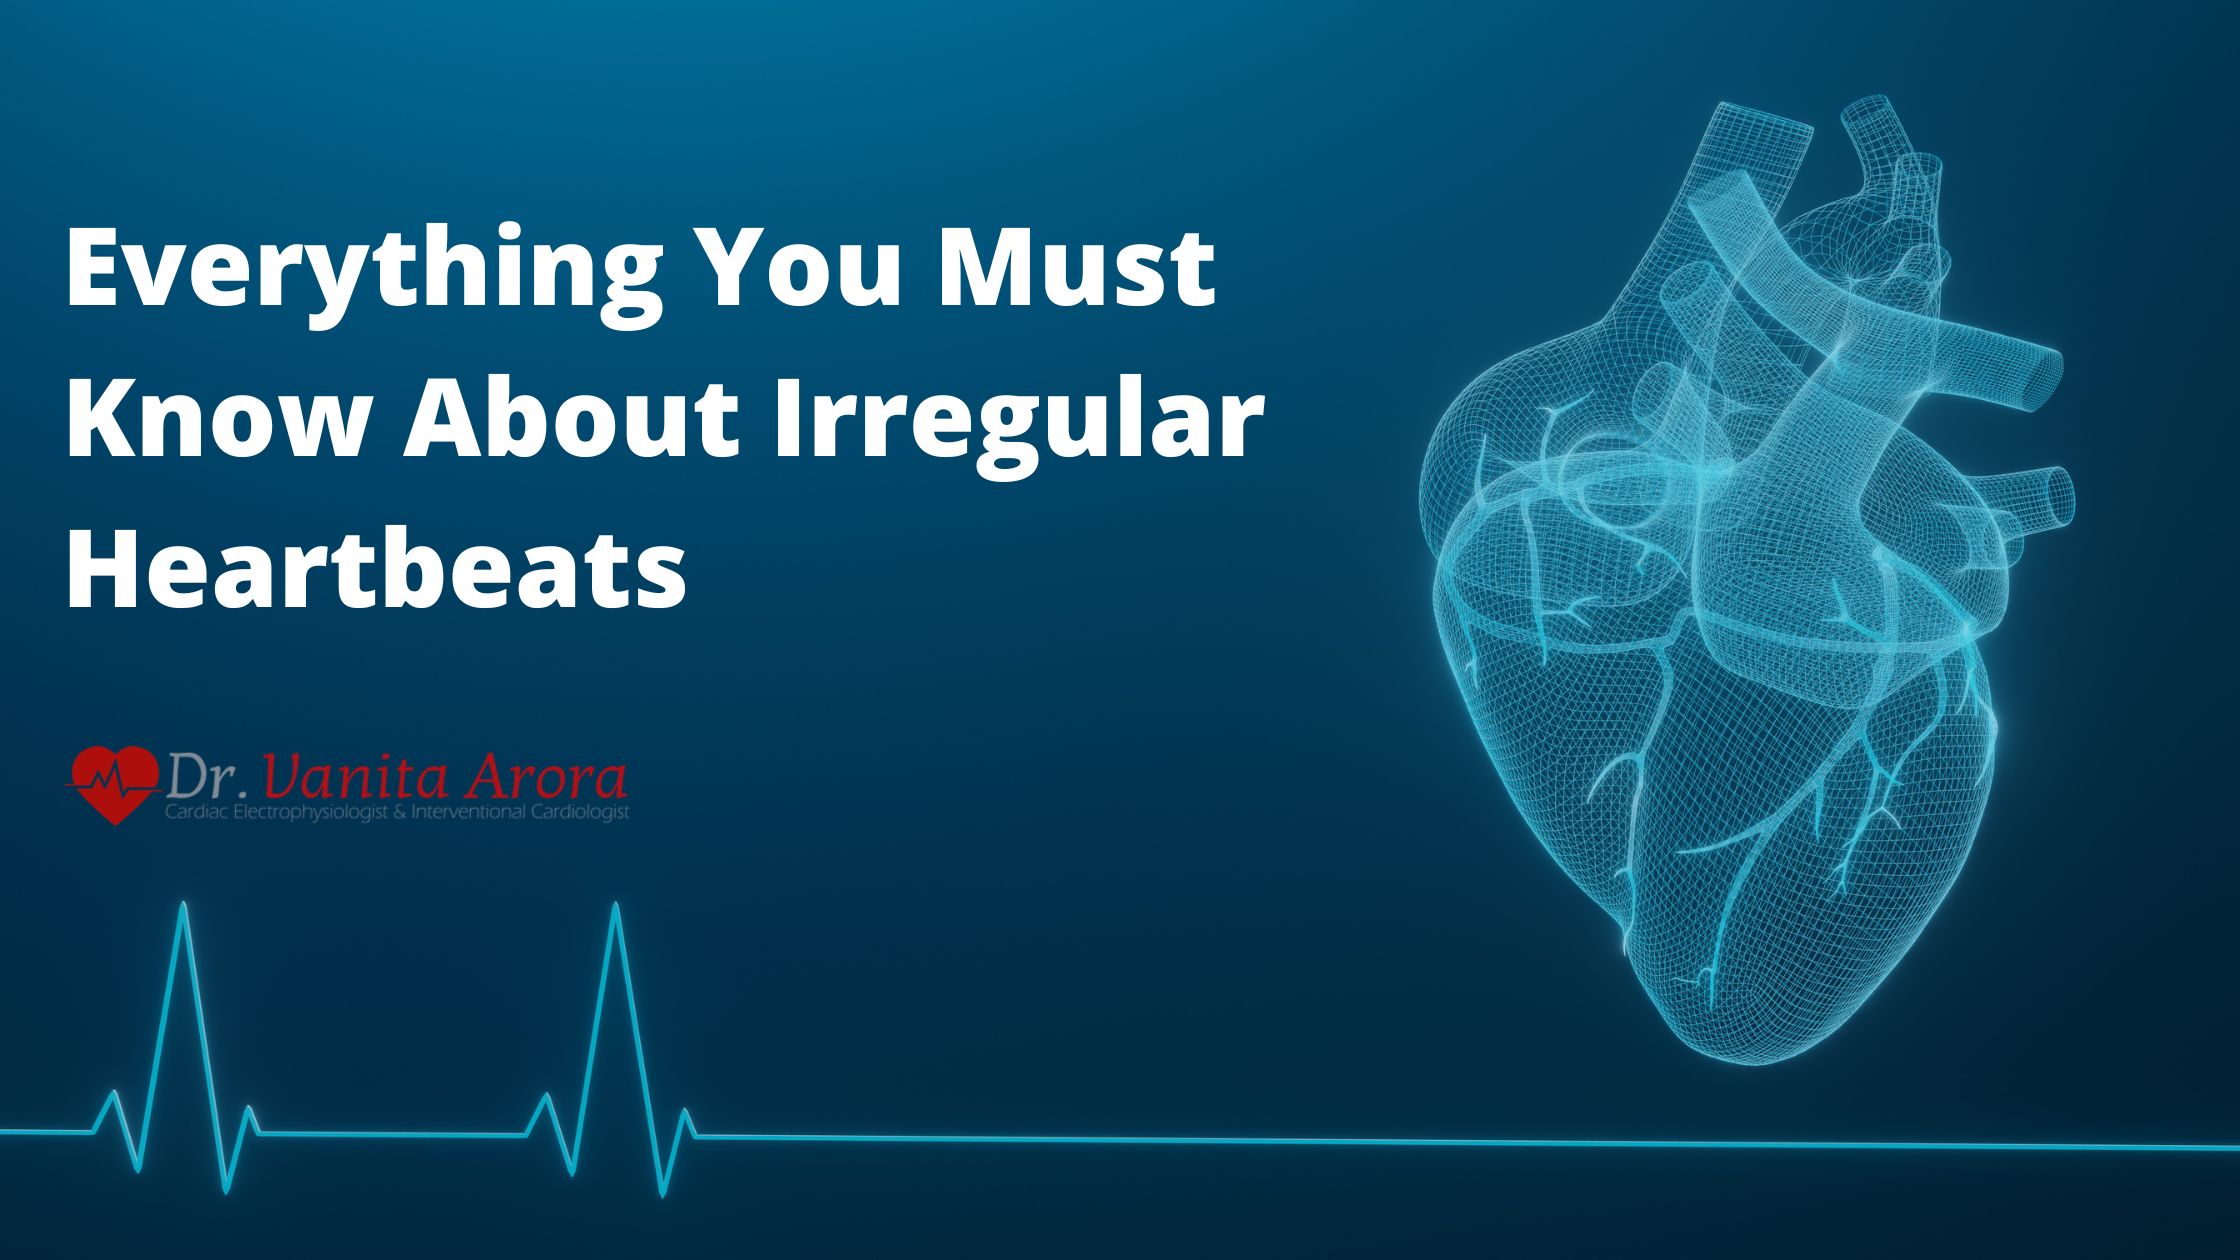 Everything you must know about irregular heartbeats